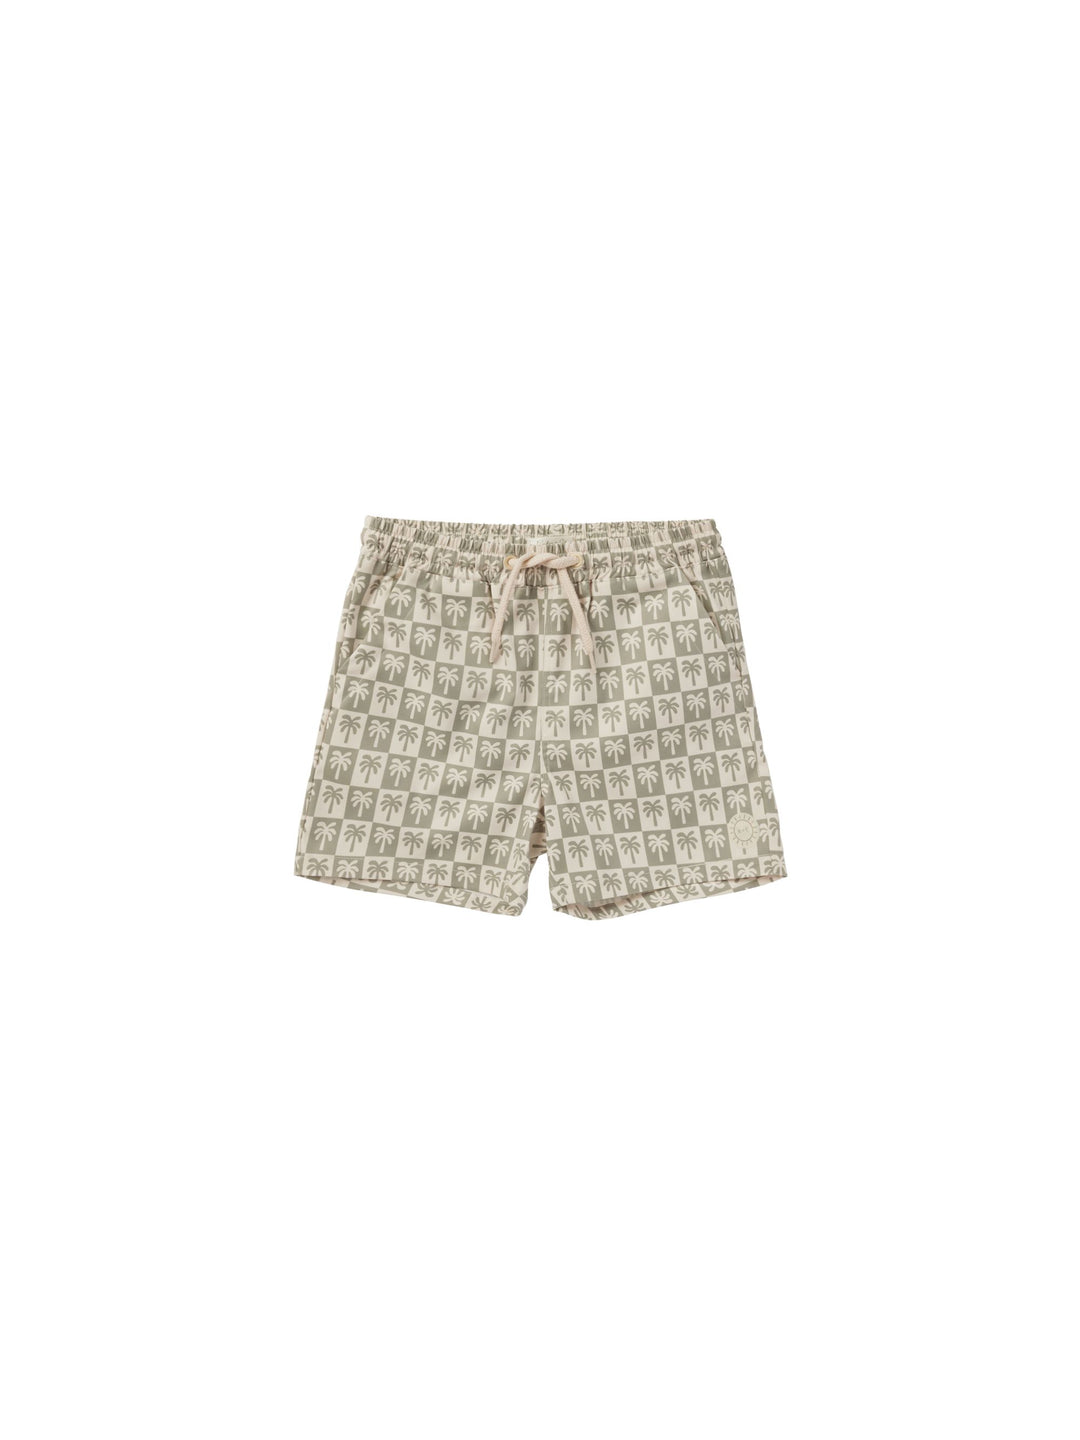 Palm Check Board Shorts by Rylee and Cru